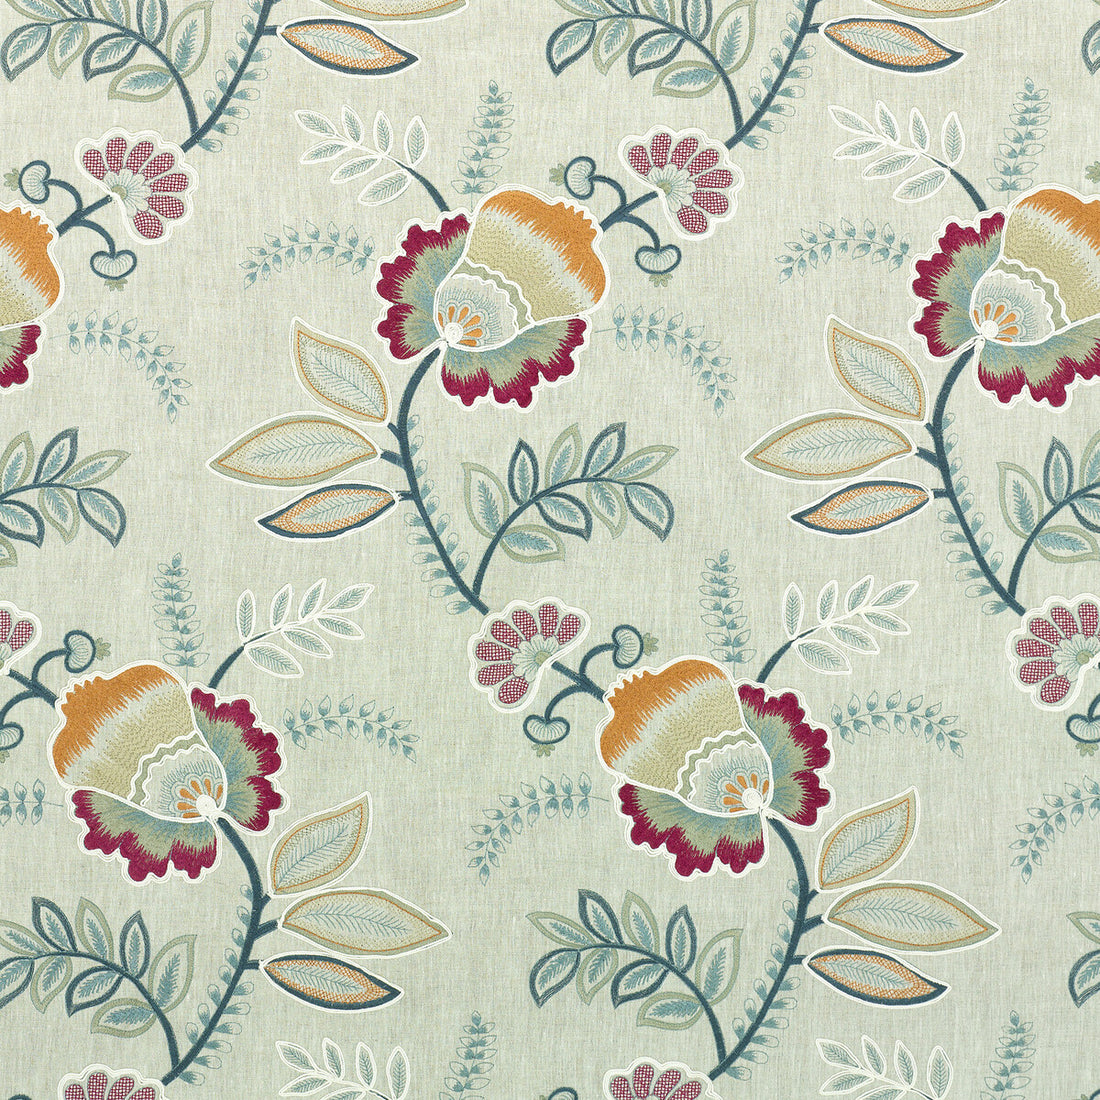 Somerford fabric in linen/multi color - pattern BF10504.3.0 - by G P &amp; J Baker in the Larkhill collection